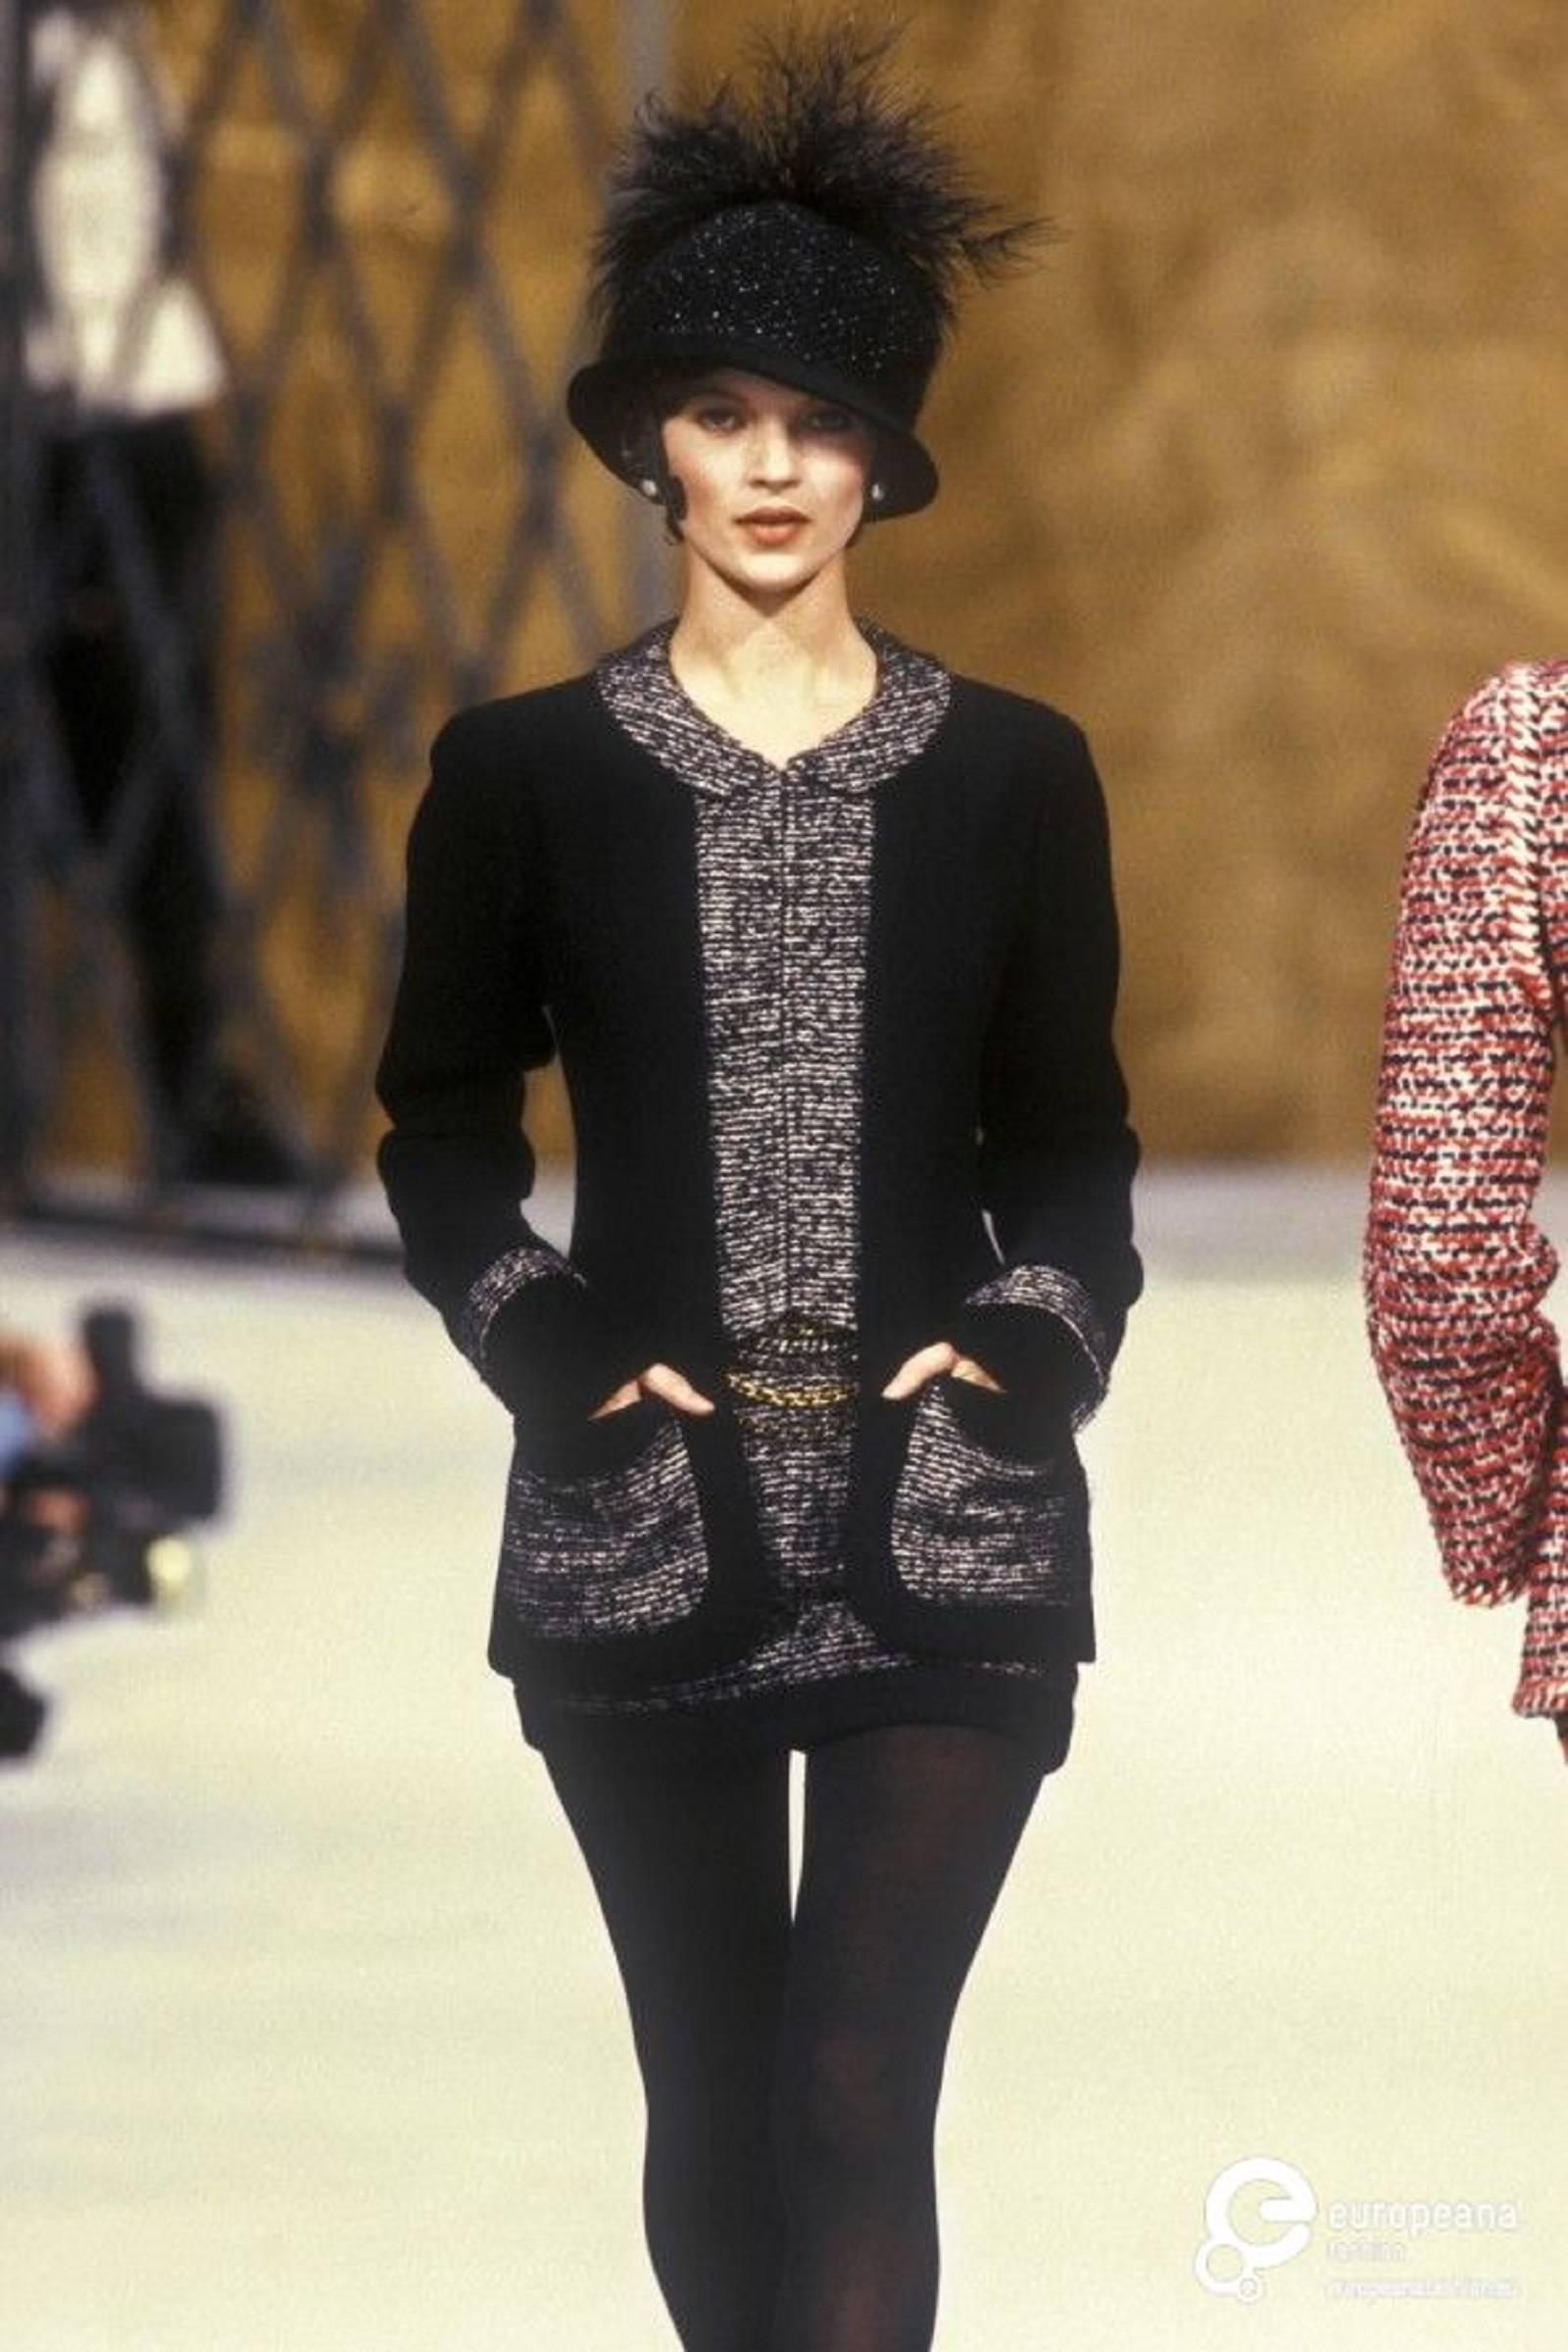 CHANEL A/W 1993 Haute Couture Classic Black White Boucle Wool Jacket ...